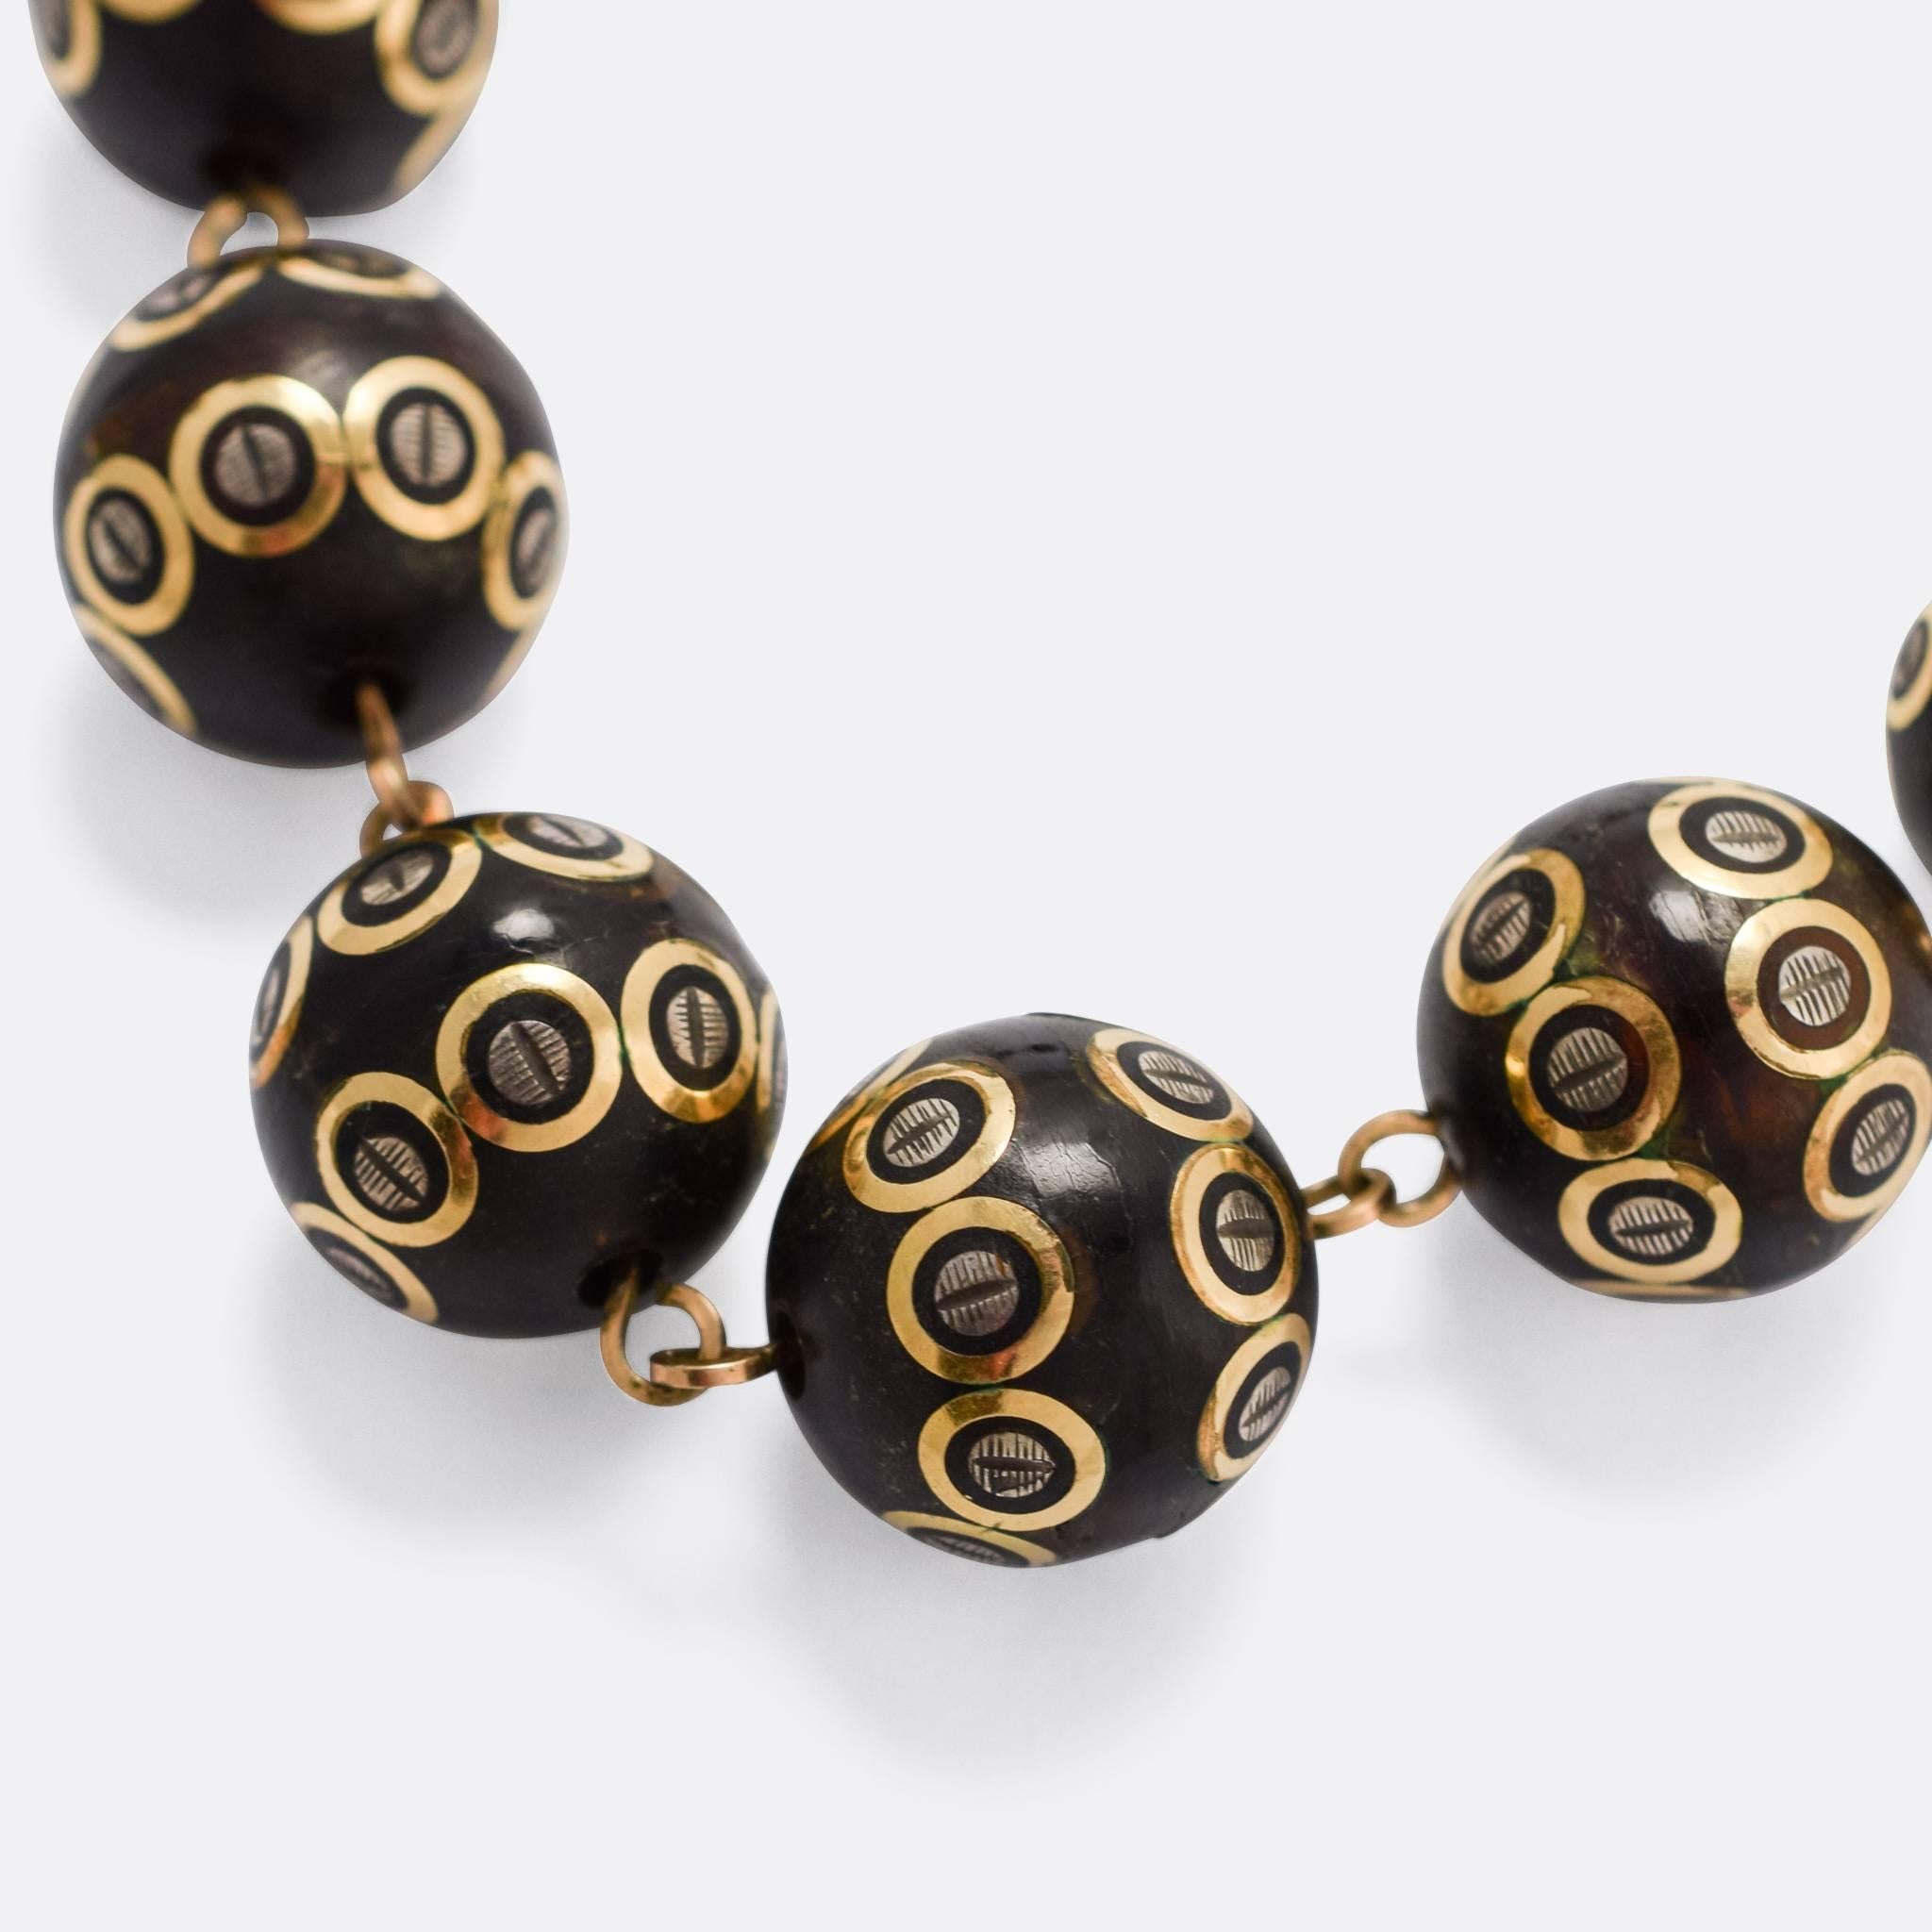 A most unusual, Museum Quality, Victorian graduated bead necklace - dating to c.1860. The beads are made from pique, a term used to describe the process of inlaying precious metal in moulded tortoise shell to create a pattern. The piece comprises 24